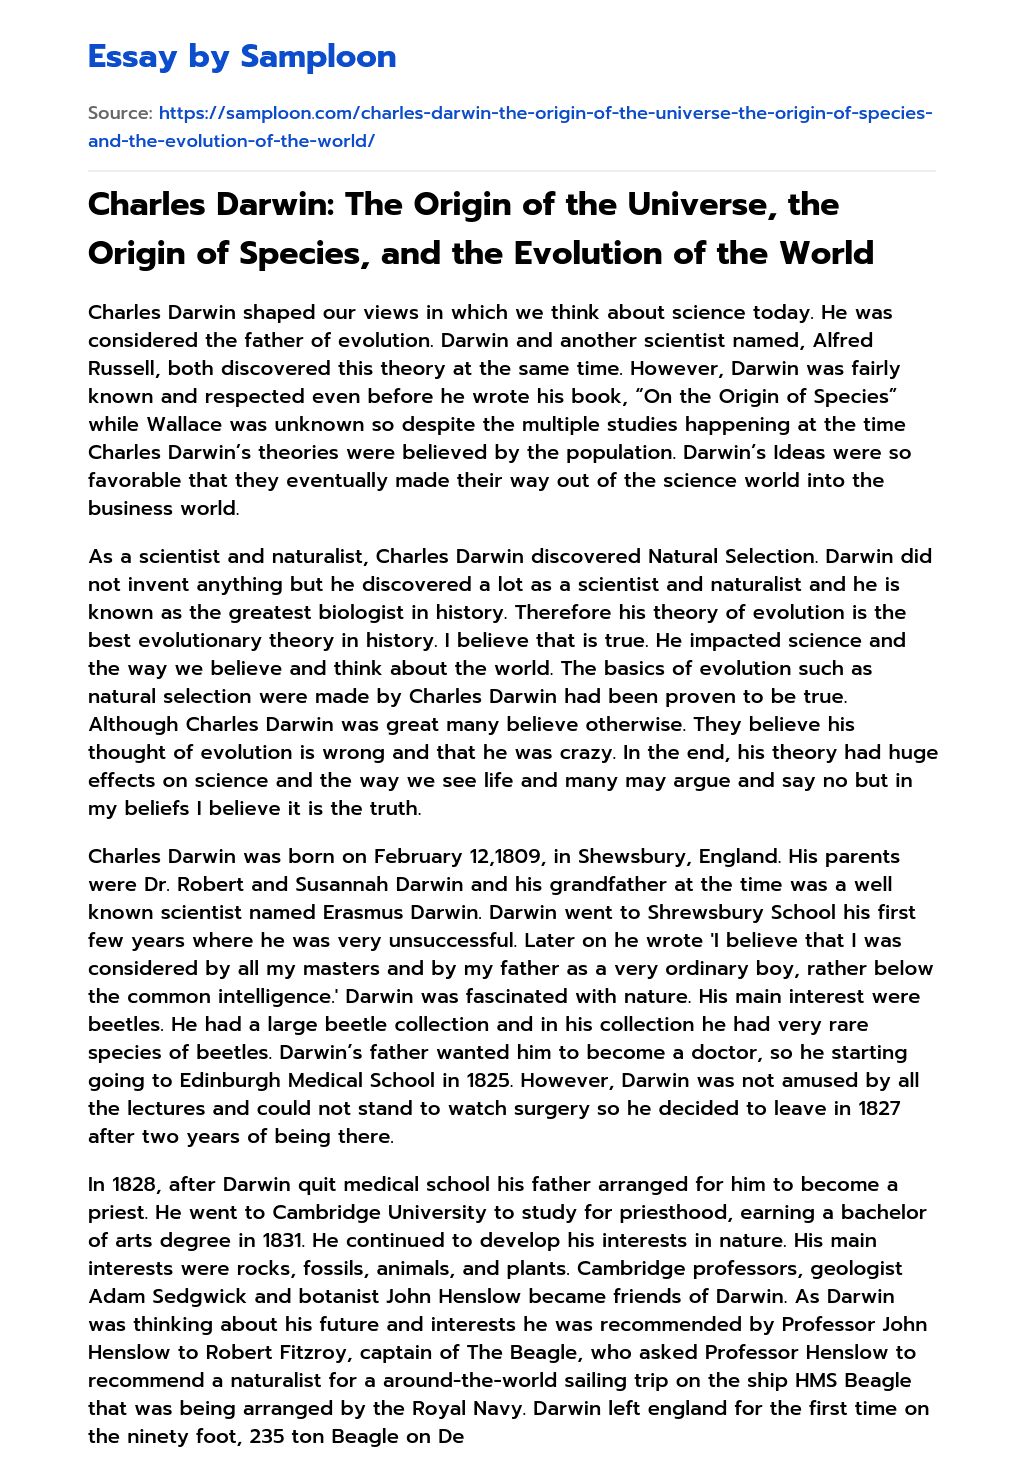 Charles Darwin: The Origin of the Universe, the Origin of Species, and the Evolution of the World essay